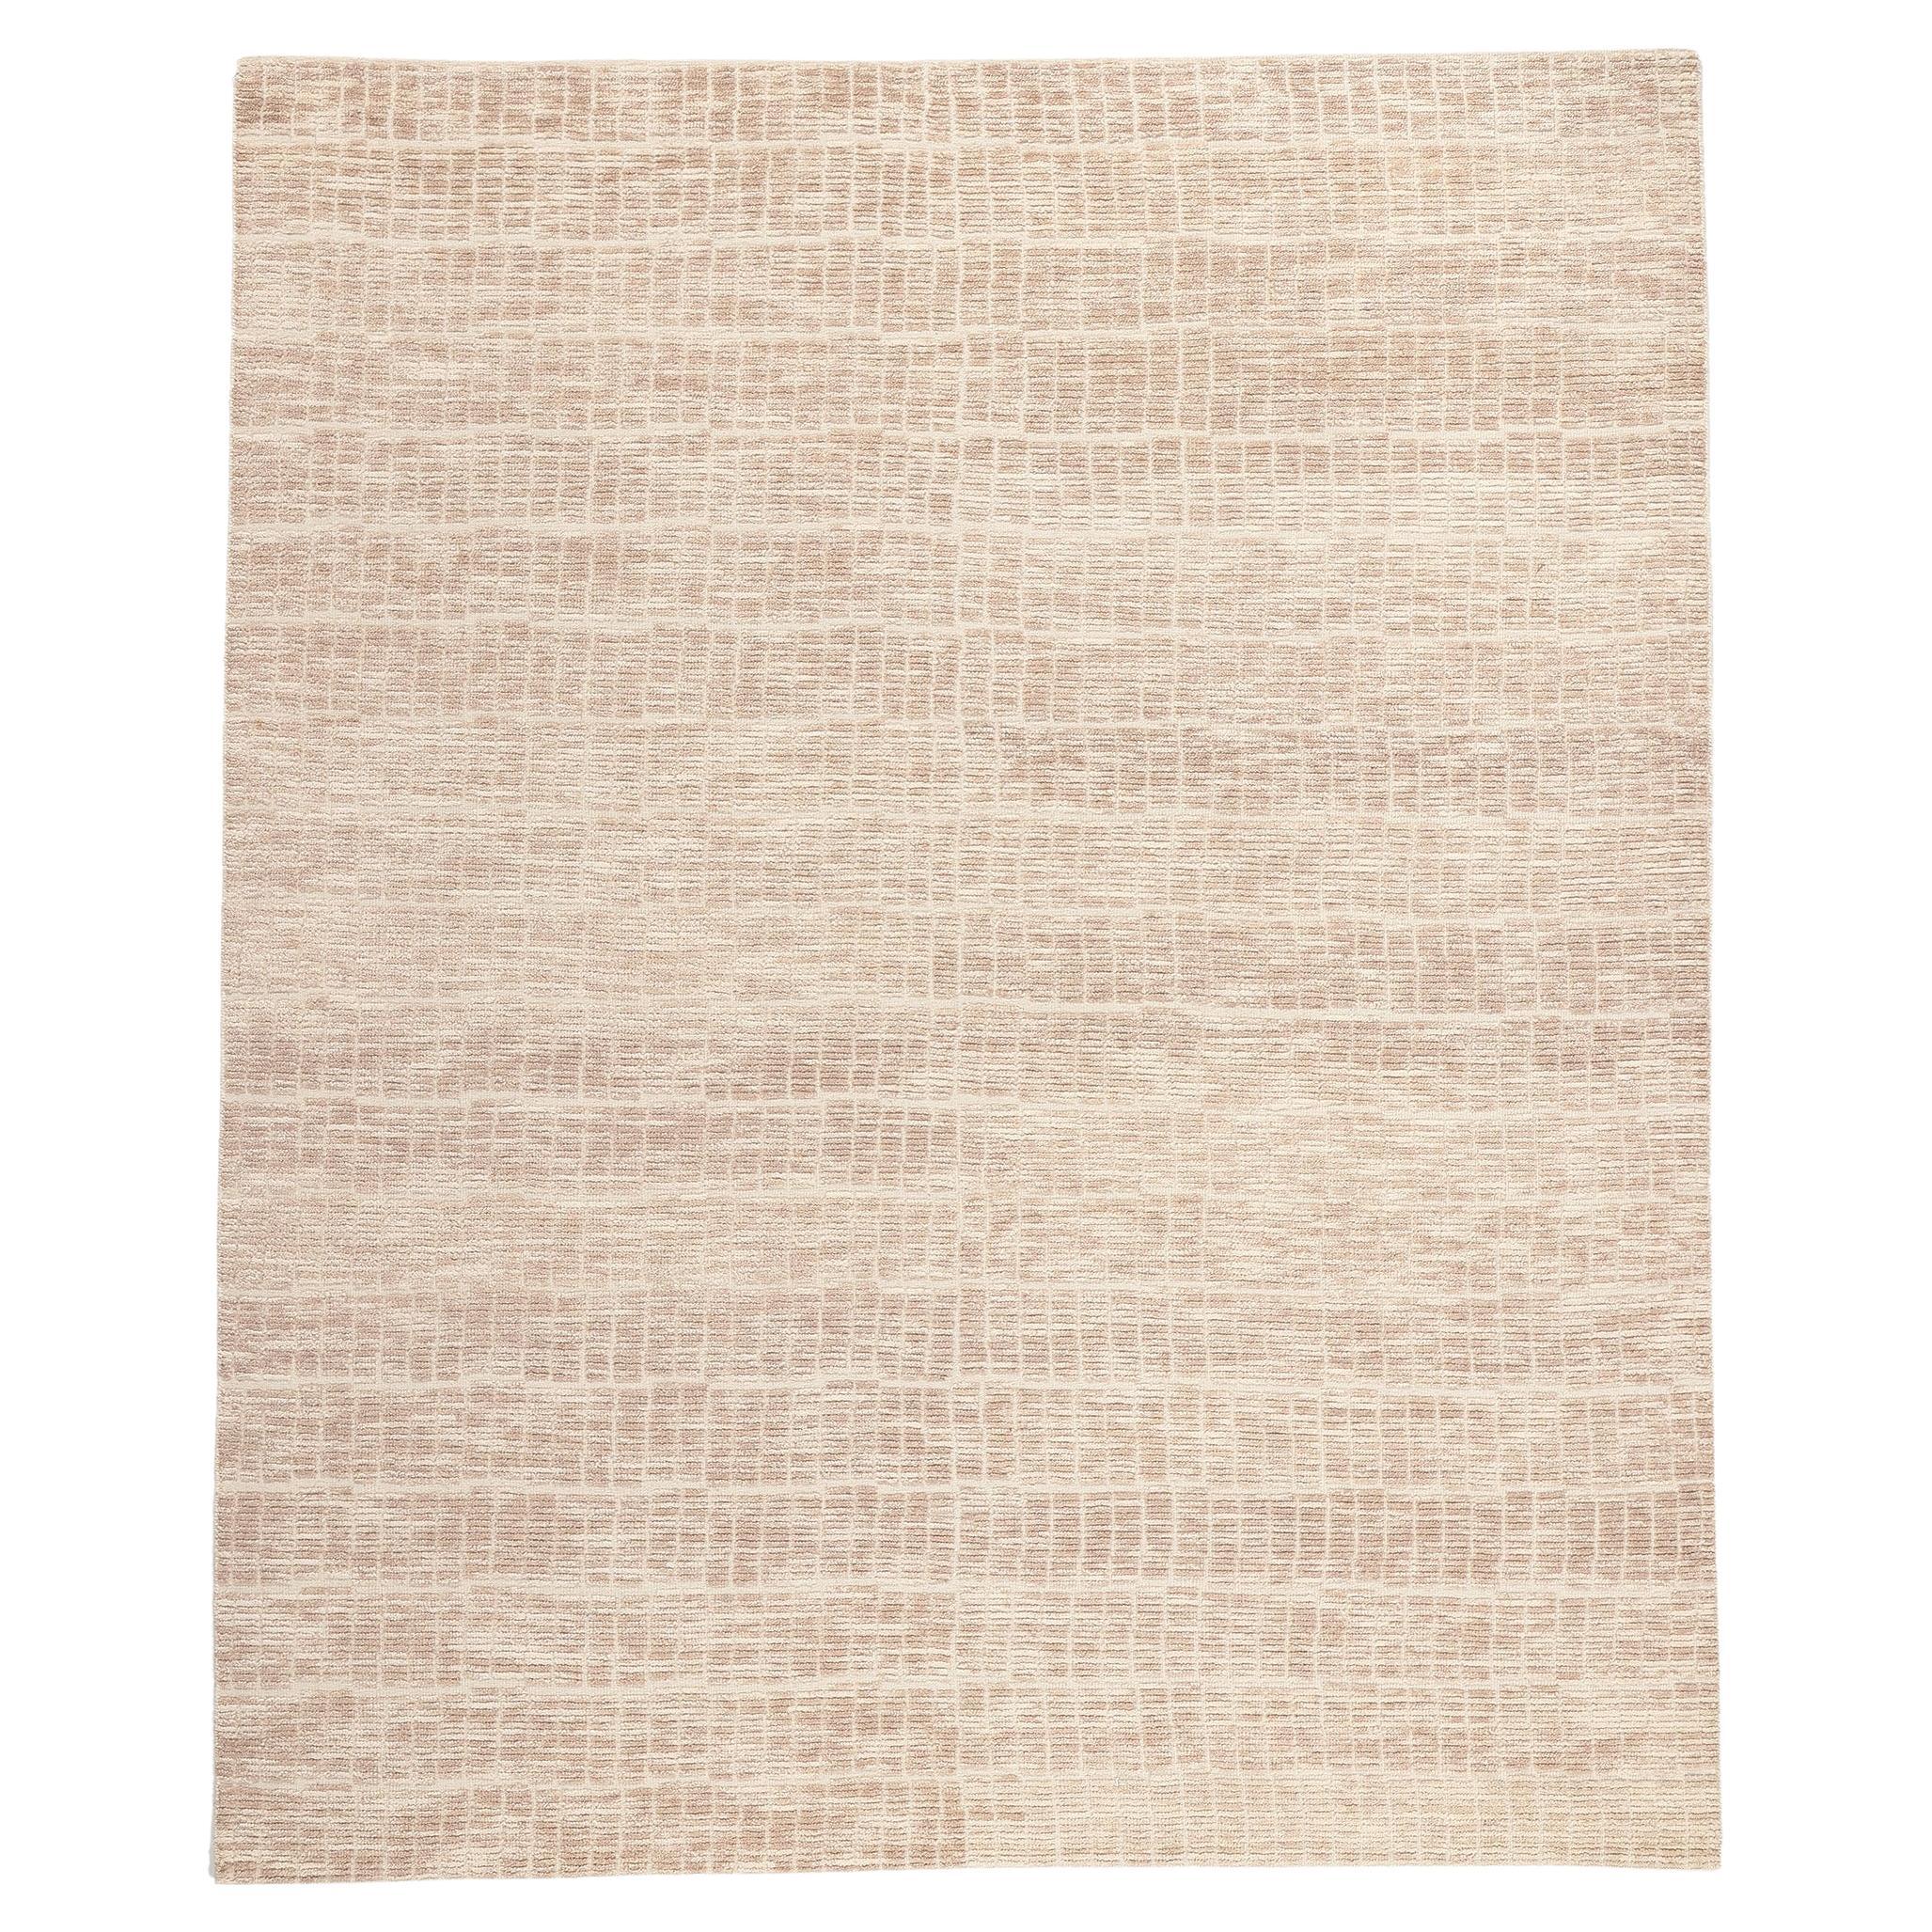 Organic Modern High-Low Rug, Abstract Expressionism Meets Subtle Shibui